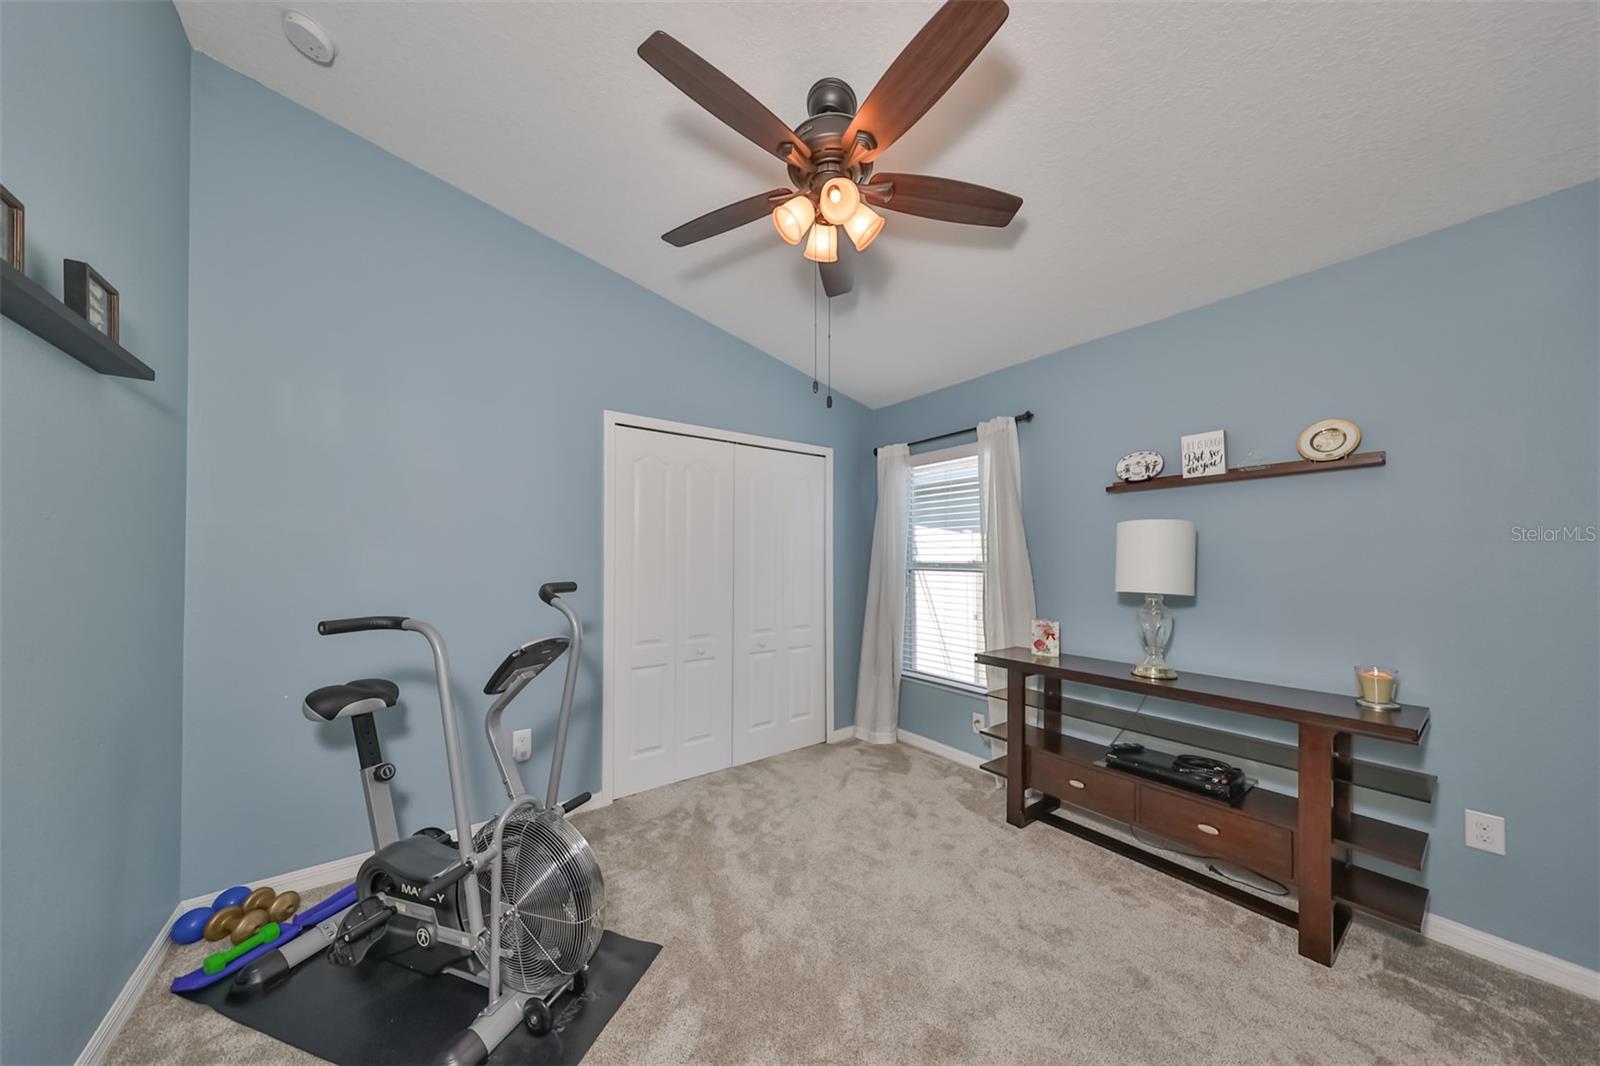 8.2 Bedroom #3 with ceiling fan